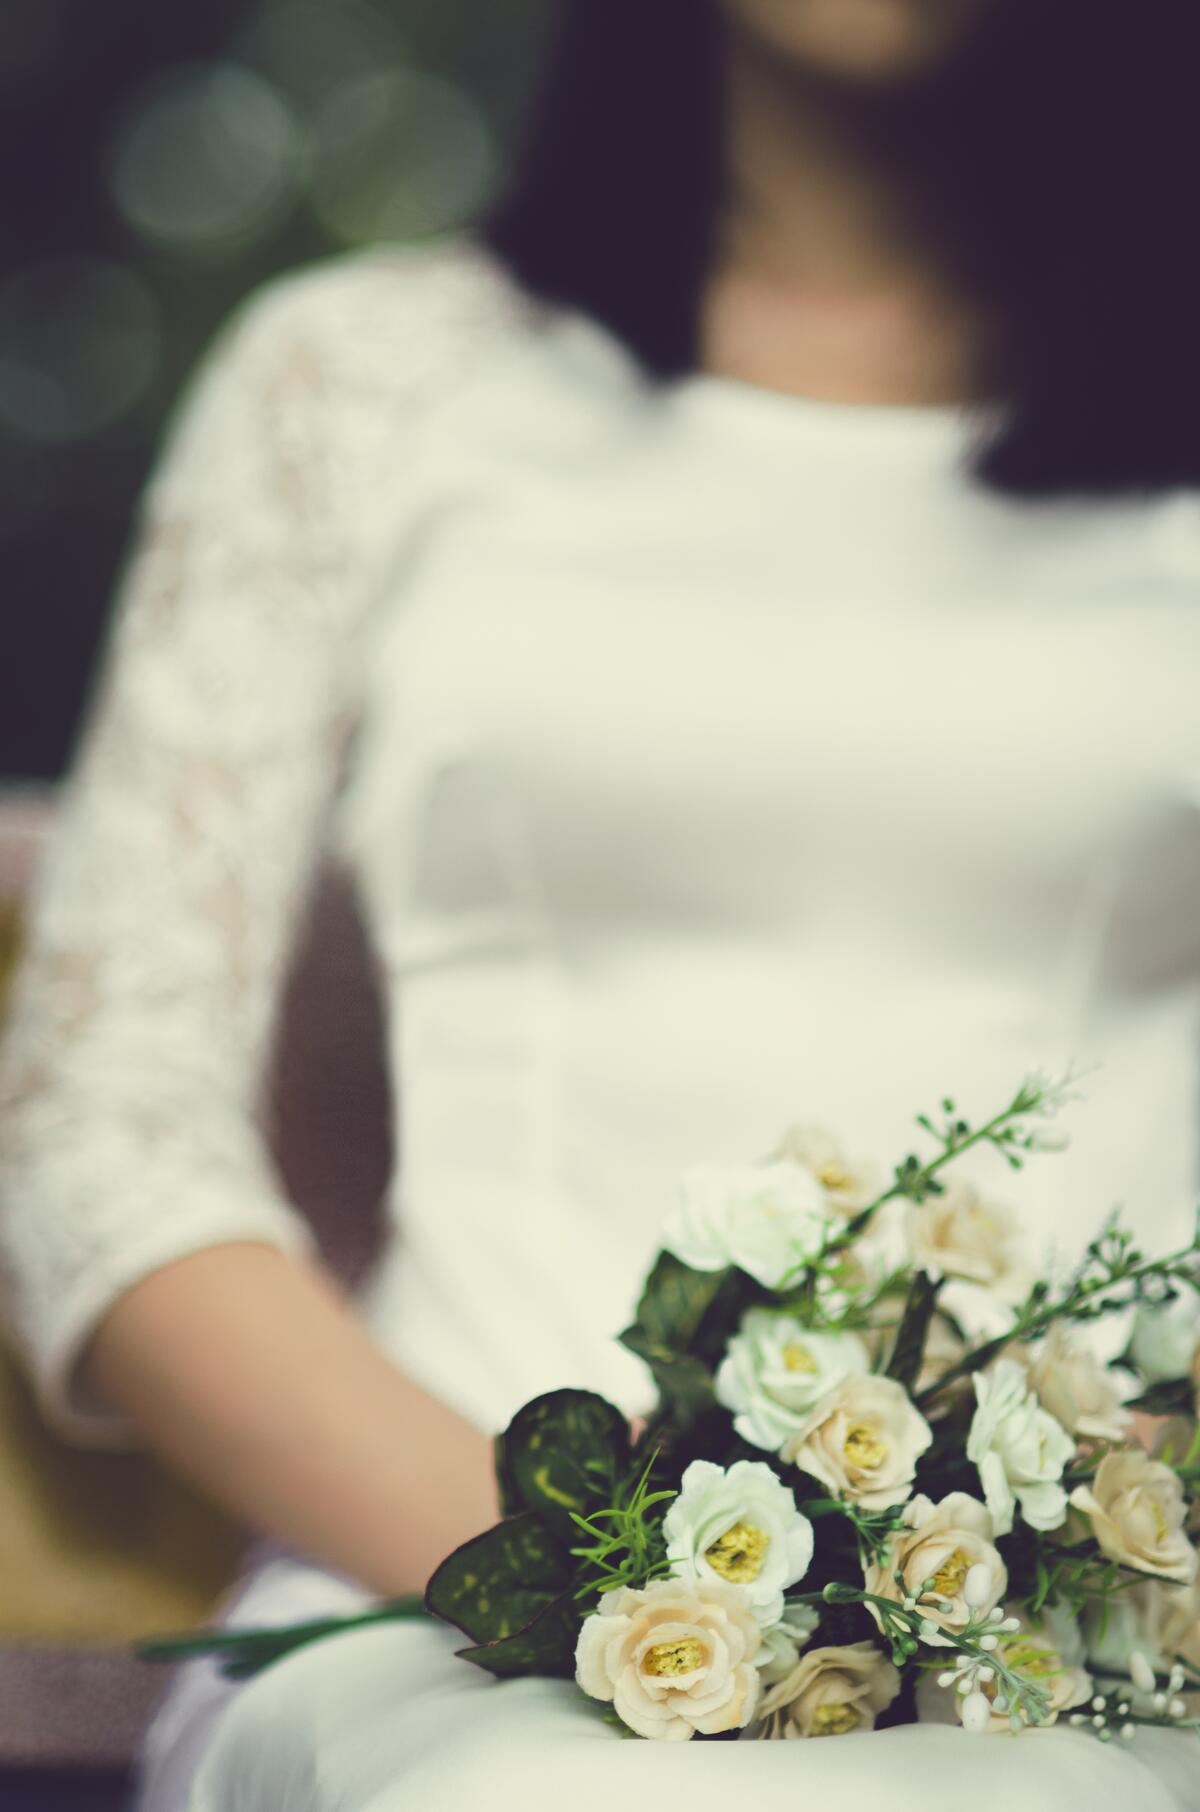 Girl in a wedding dress with a bouquet of flowers